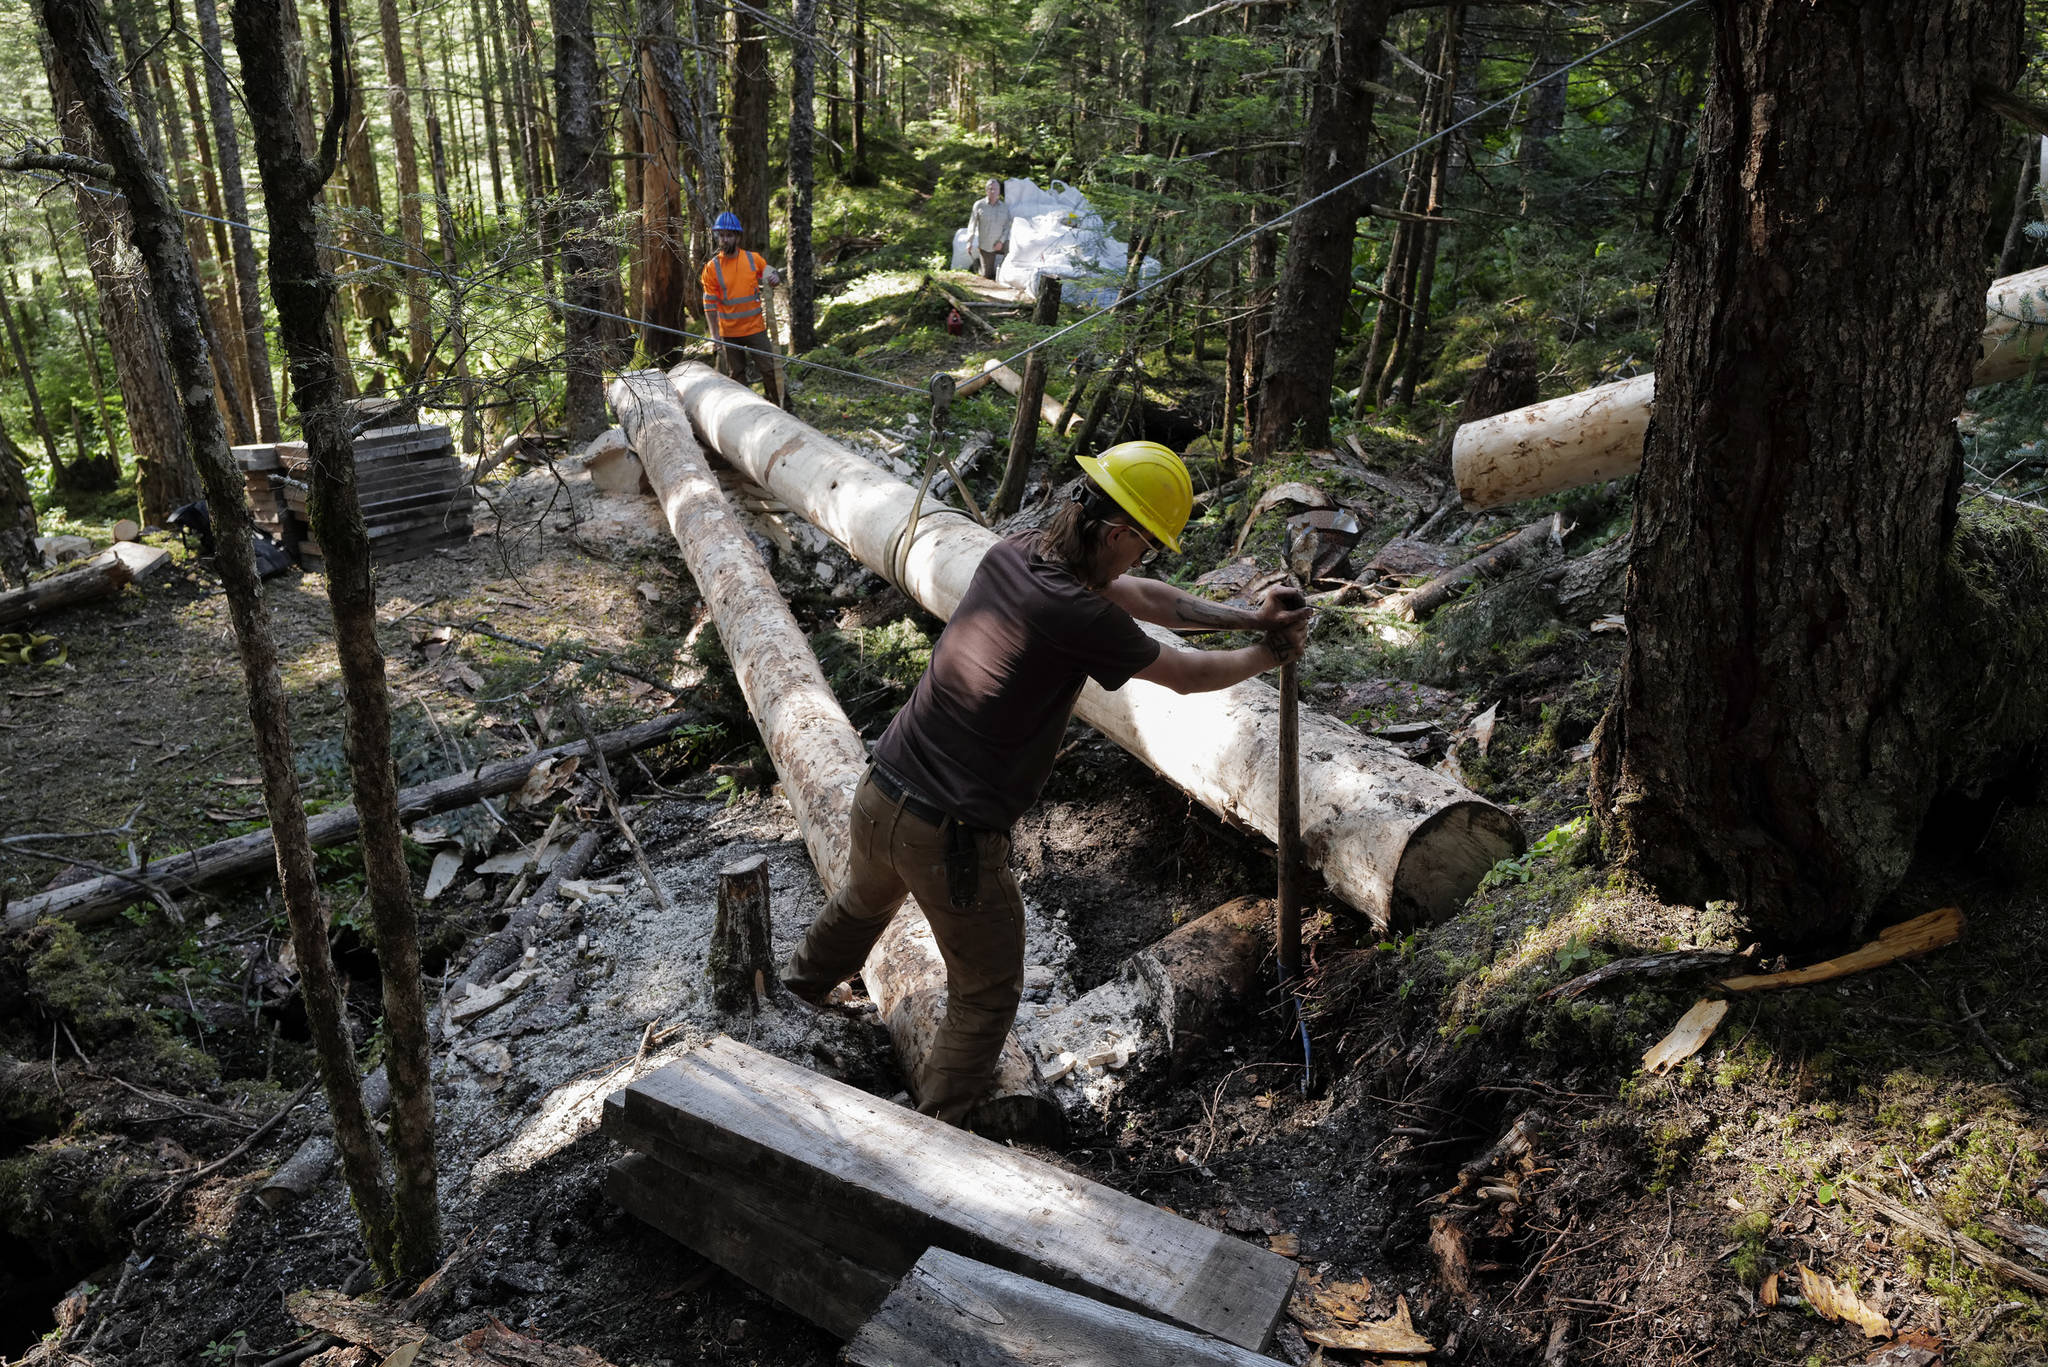 Crew leader Duncan Campbell, right, and Trail Mix Project Manager Ryan O’Shaughnessy work on a log bridge for a new Treadwell Gorge reroute trail on the Treadwell Ditch Trail on Thursday, Aug. 8, 2019. (Michael Penn | Juneau Empire)